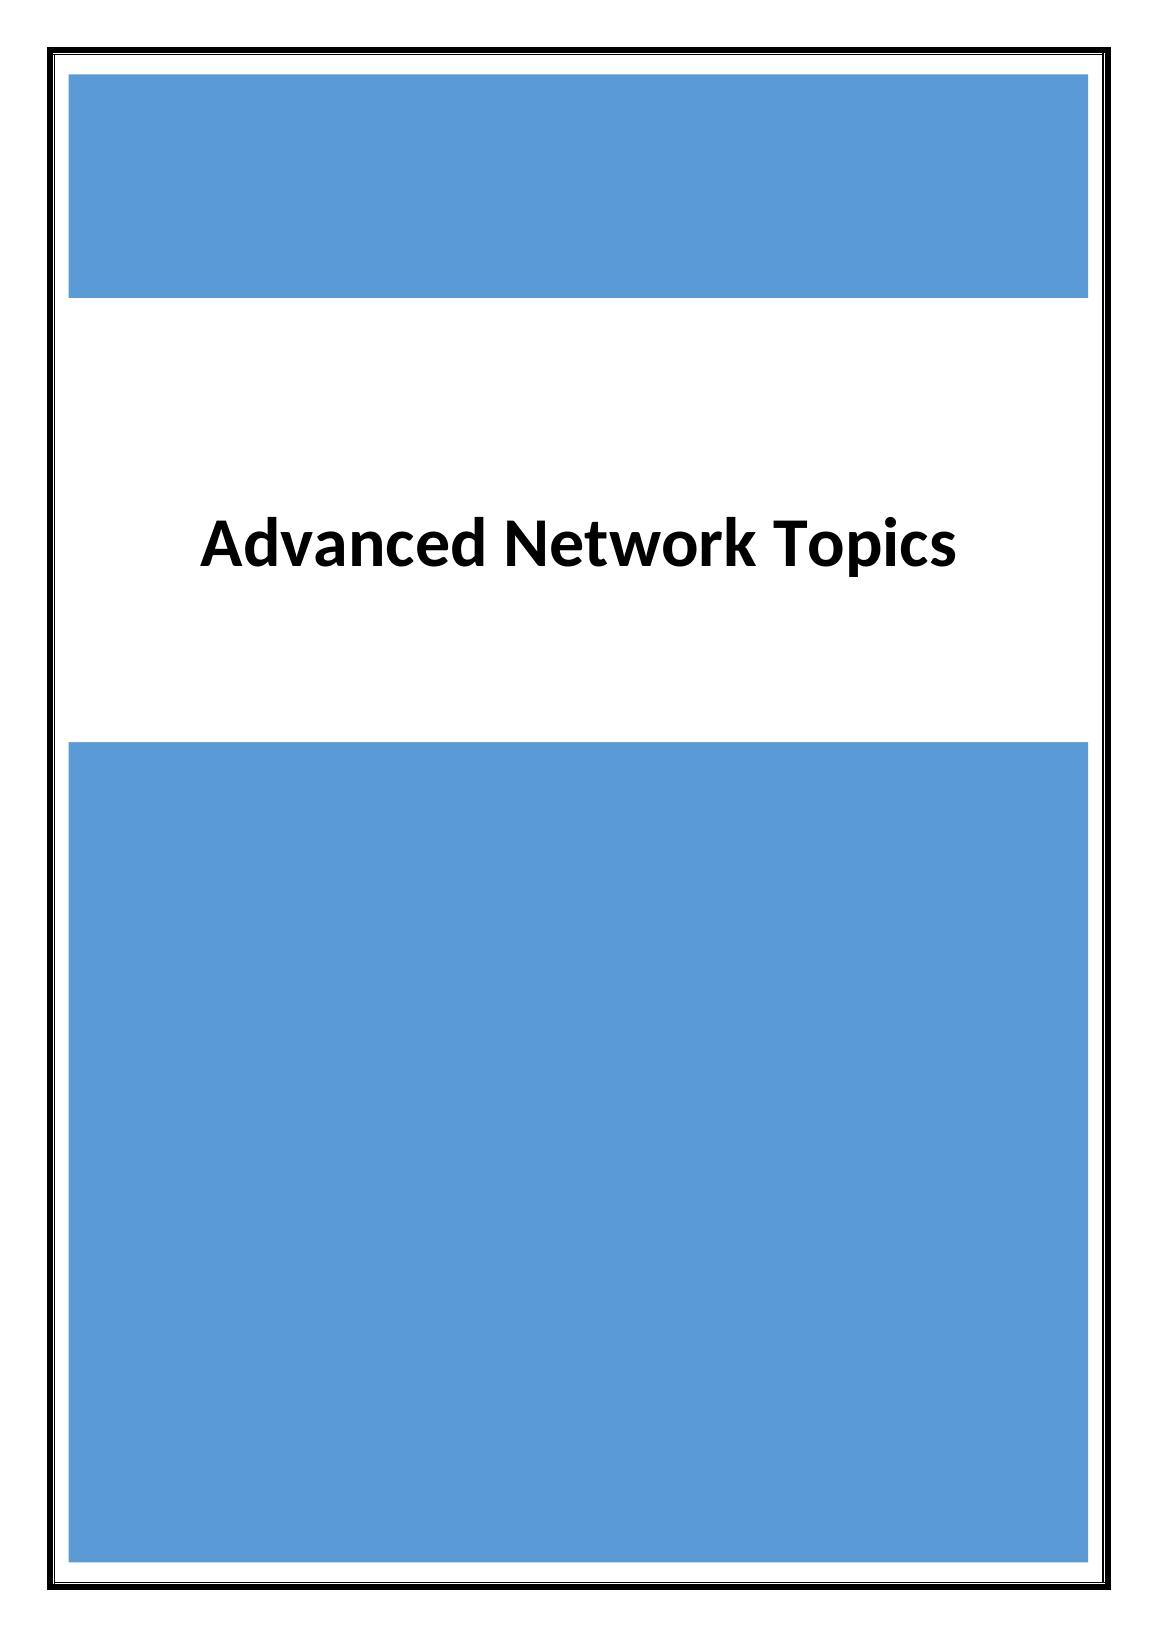 ICT301 - Advanced Network Security Assignment_1